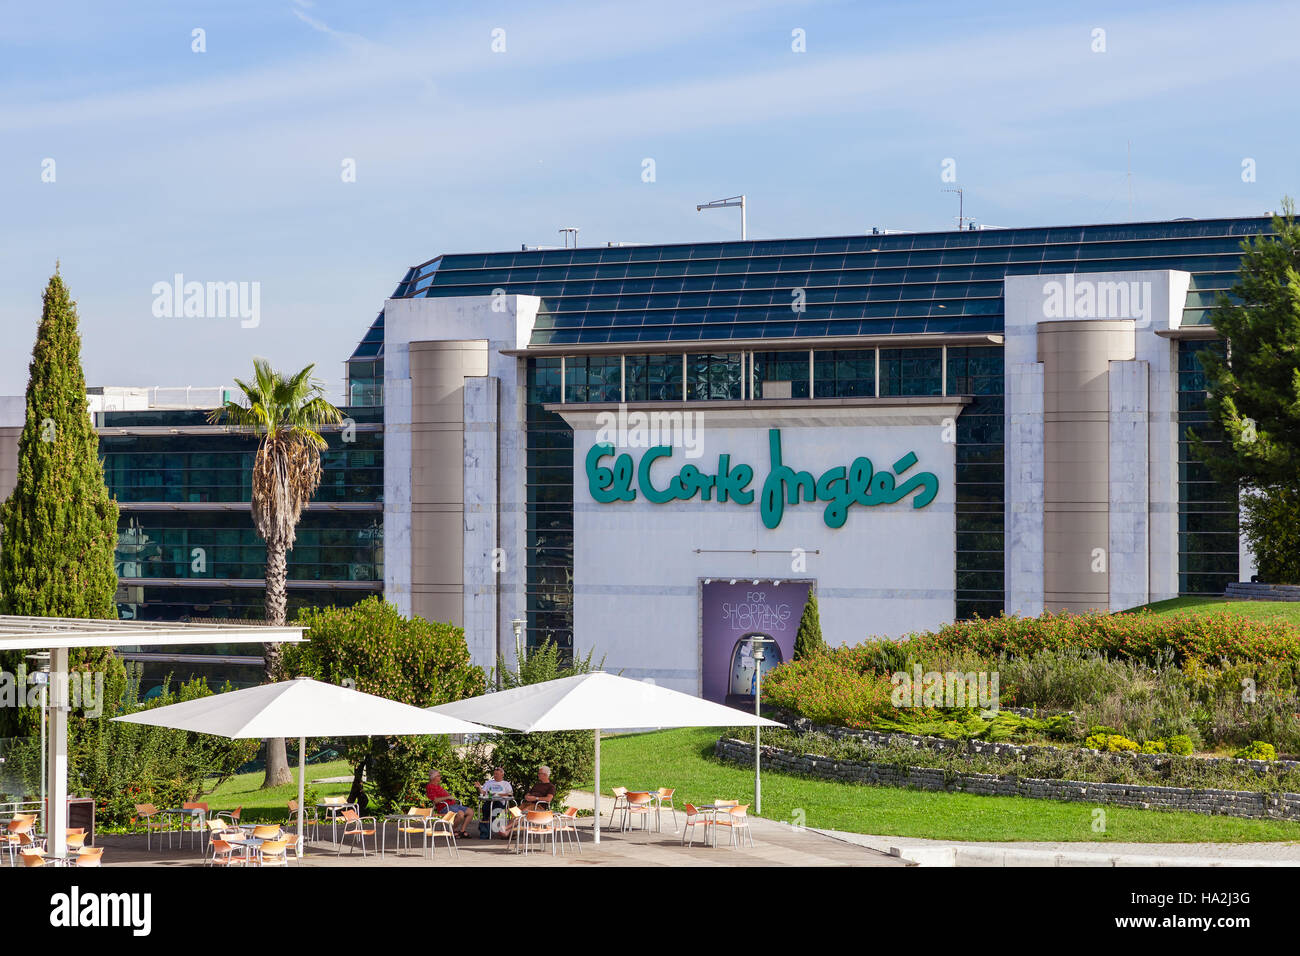 Page 3 - Corte Ingles High Resolution Stock Photography and Images - Alamy